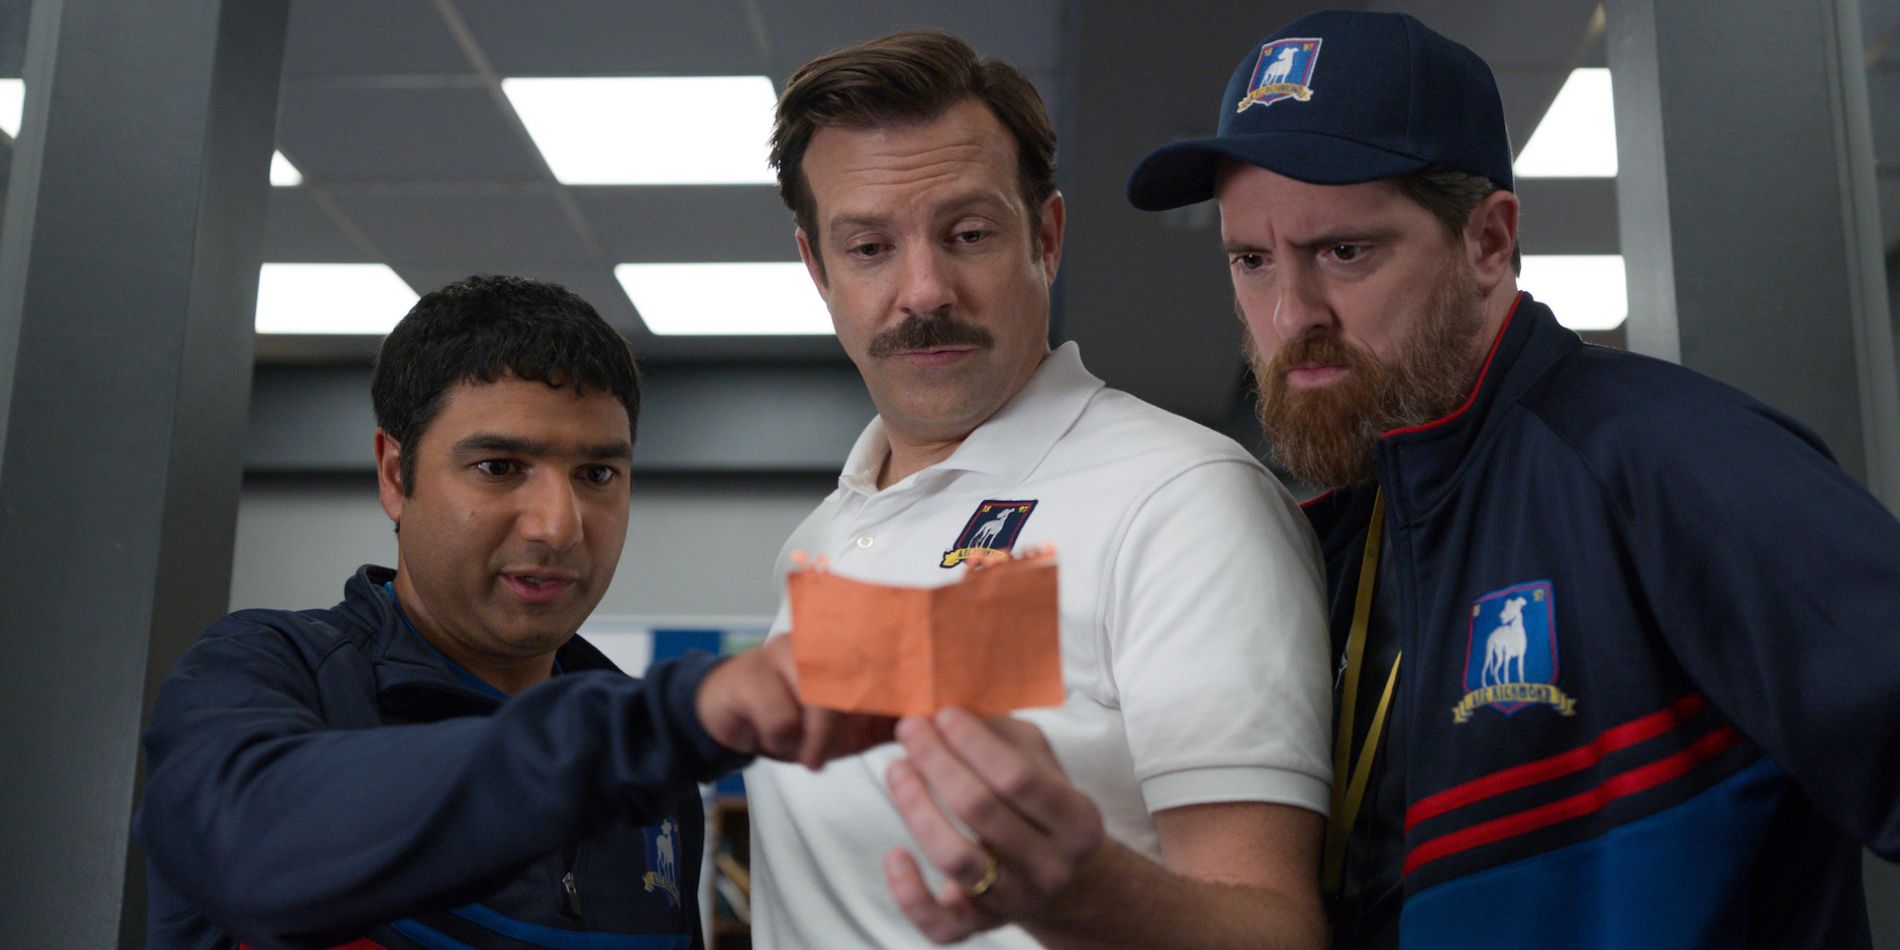 Ted, Nate and Coach Beard looking at a note in Ted Lasso